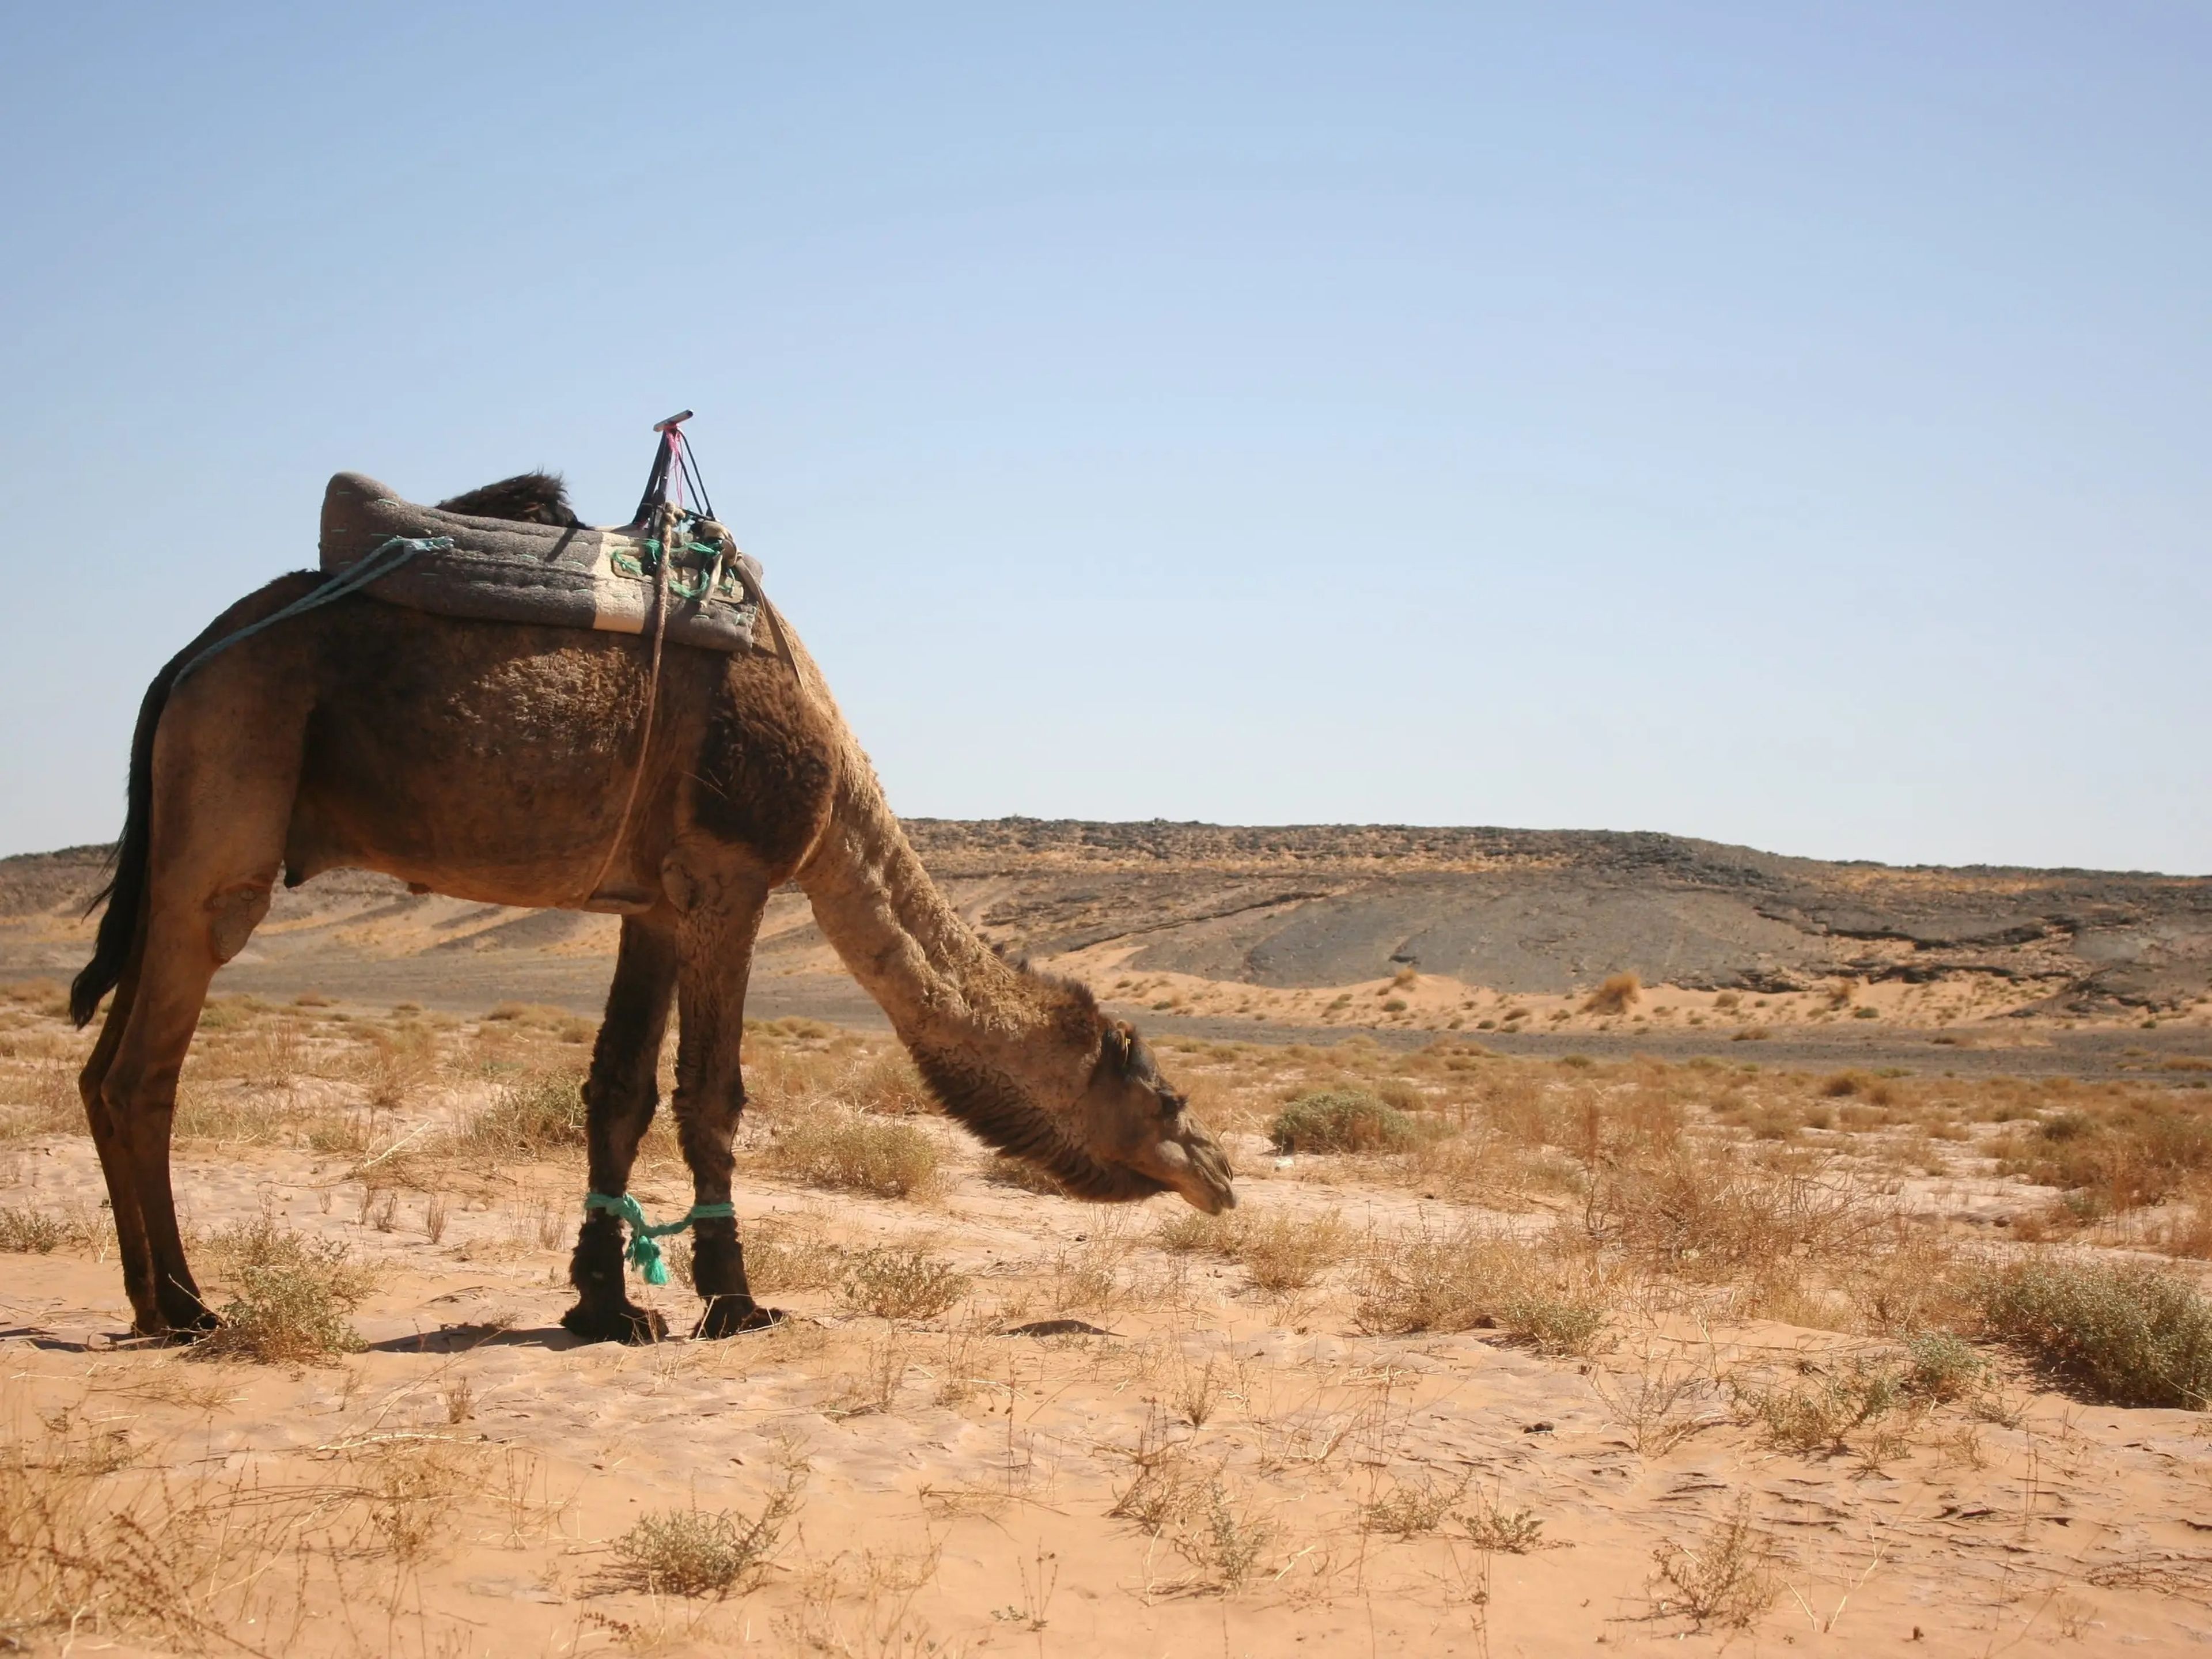 A camel with a saddle grazing in the desert.